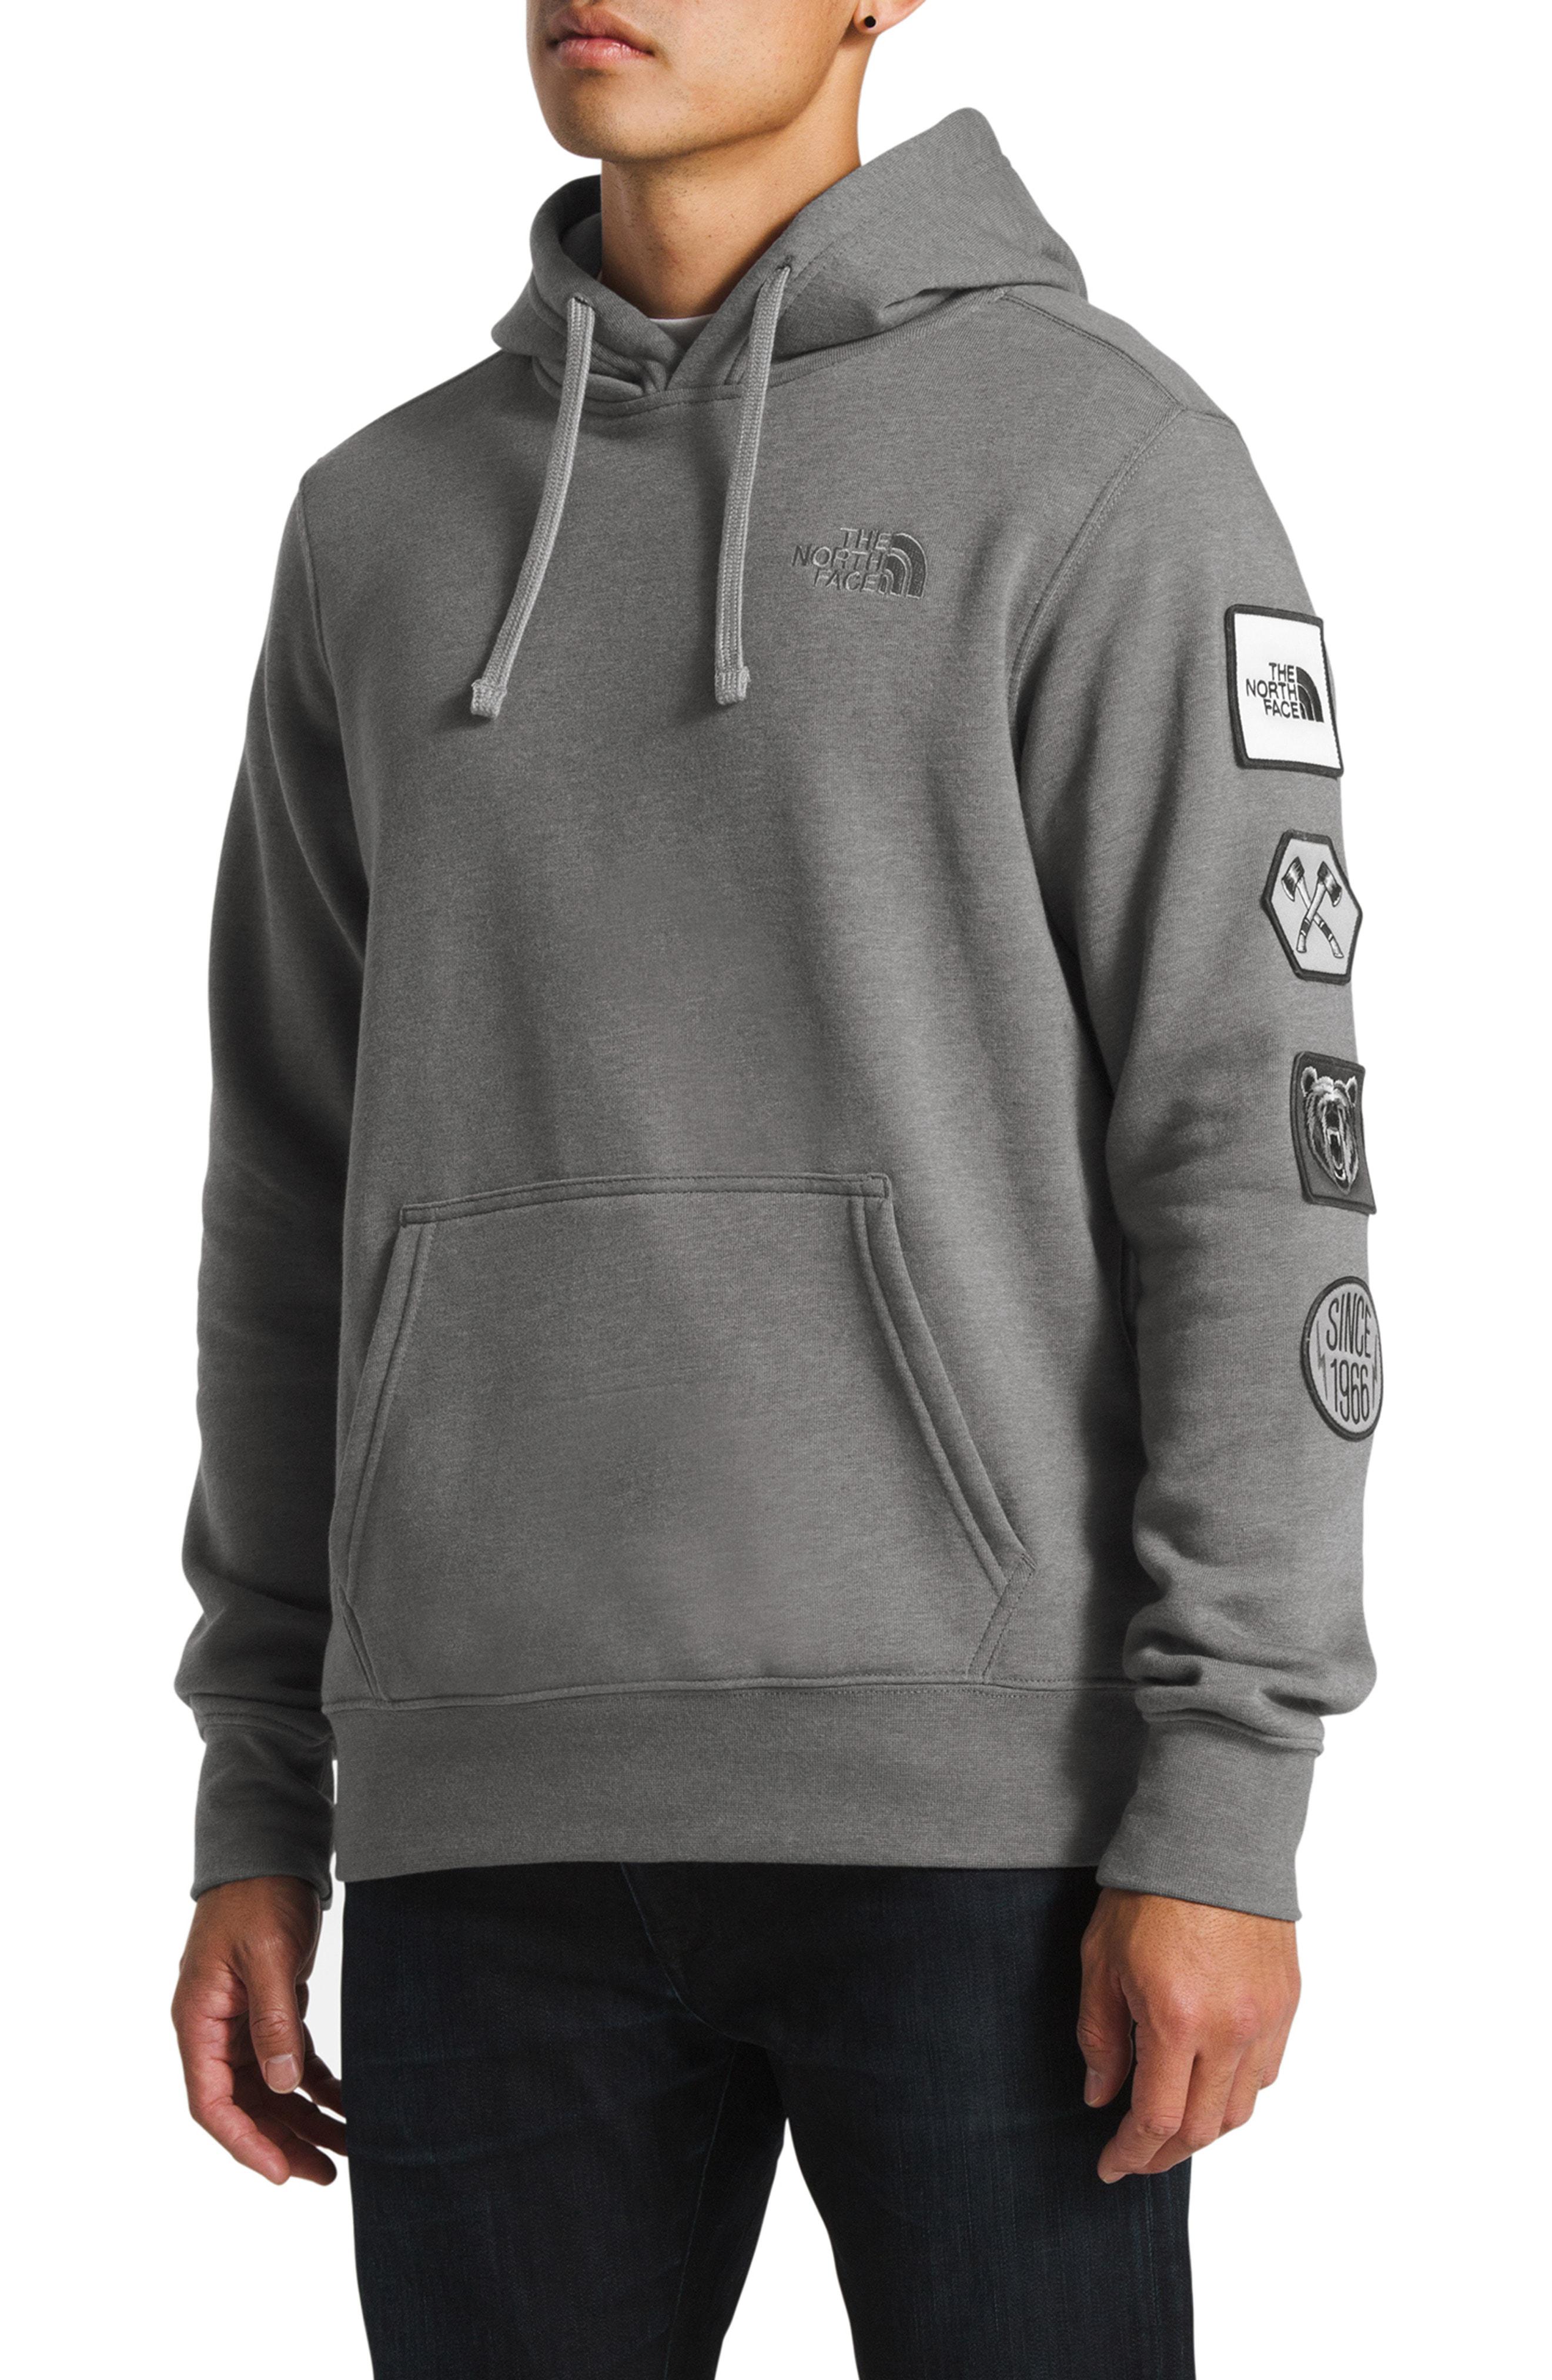 north face urban patches hoodie Cheaper 